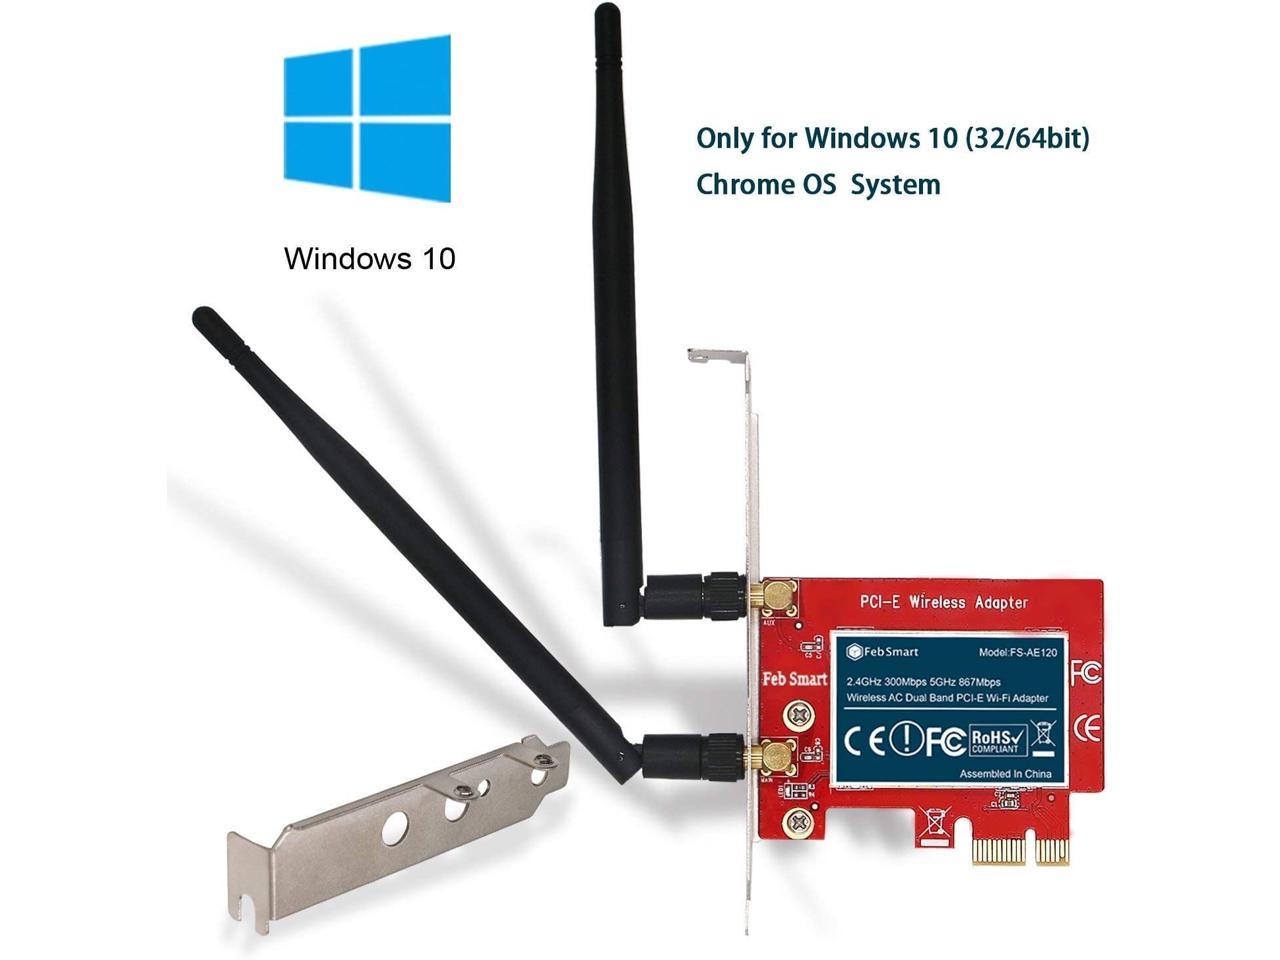 PCIe FS-AE120 FebSmart Wireless AC 1200Mbps Dual Band PCI Express Wi-Fi Adapter Wi-Fi Card for Windows 10 32/64bit Windows 8,8.1 64bit and Windows Server 2012 2012R2 2016 2019 System Desktop PCs 